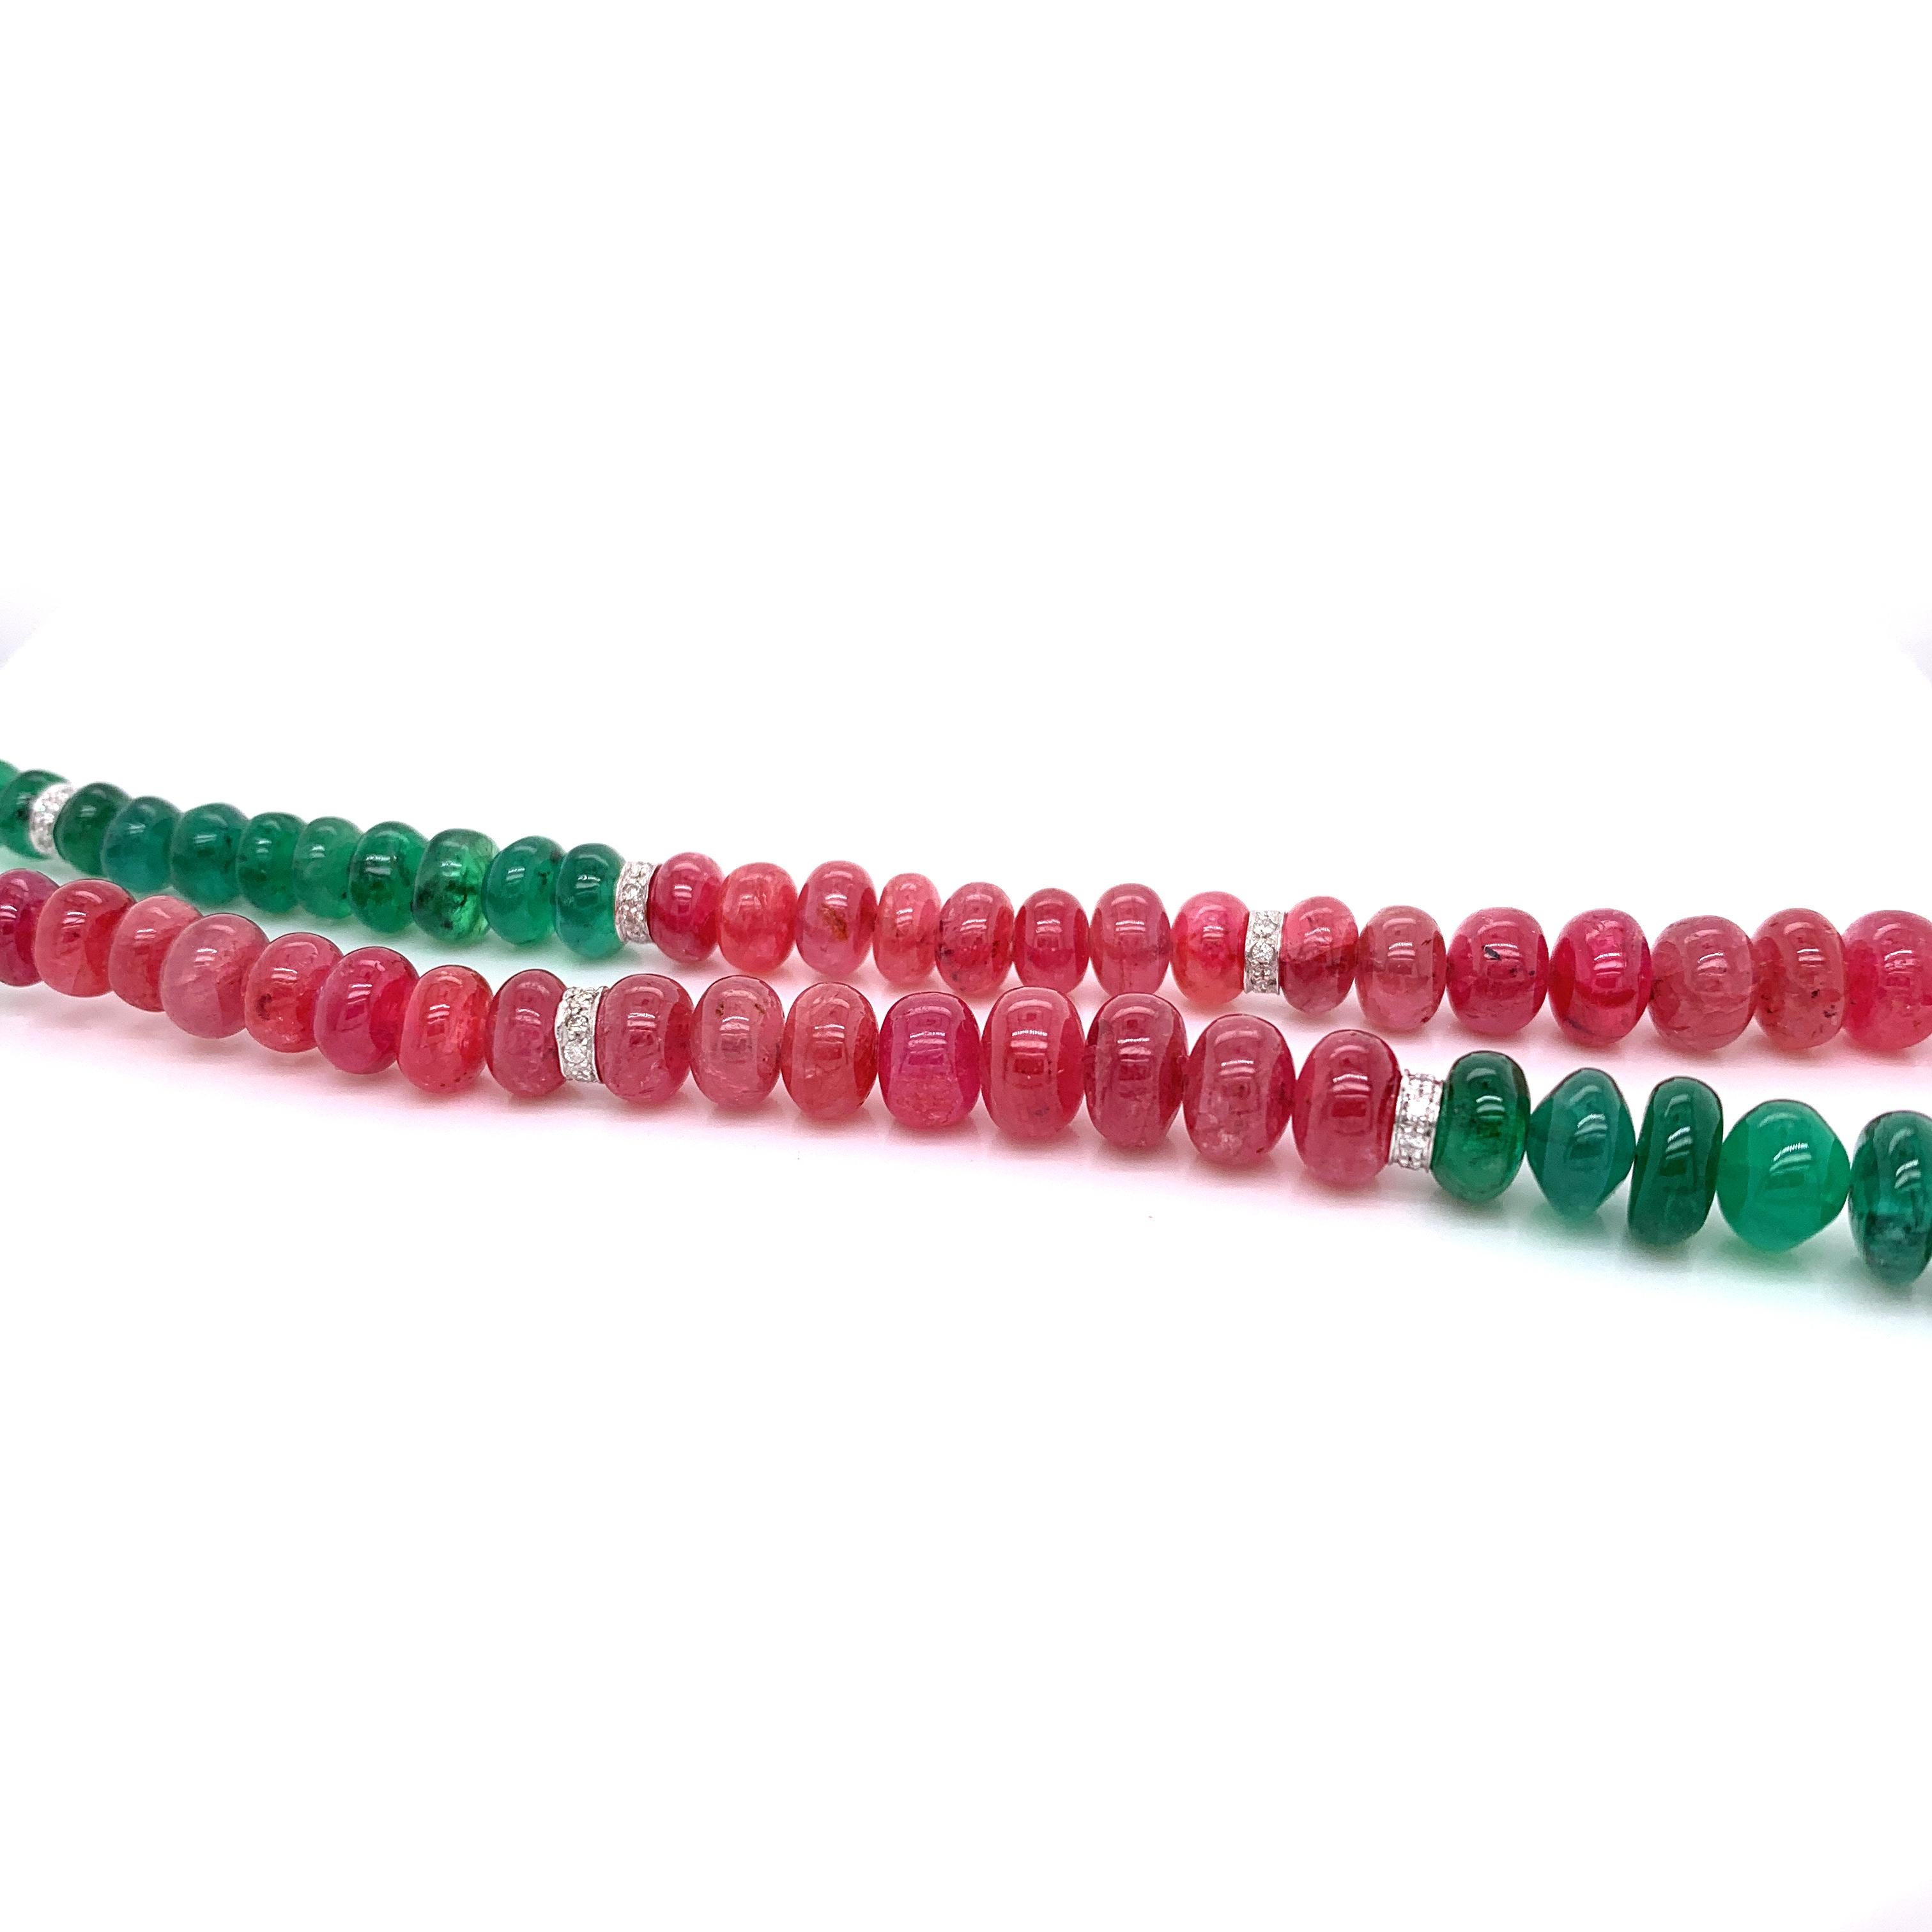 rubies and emeralds beads